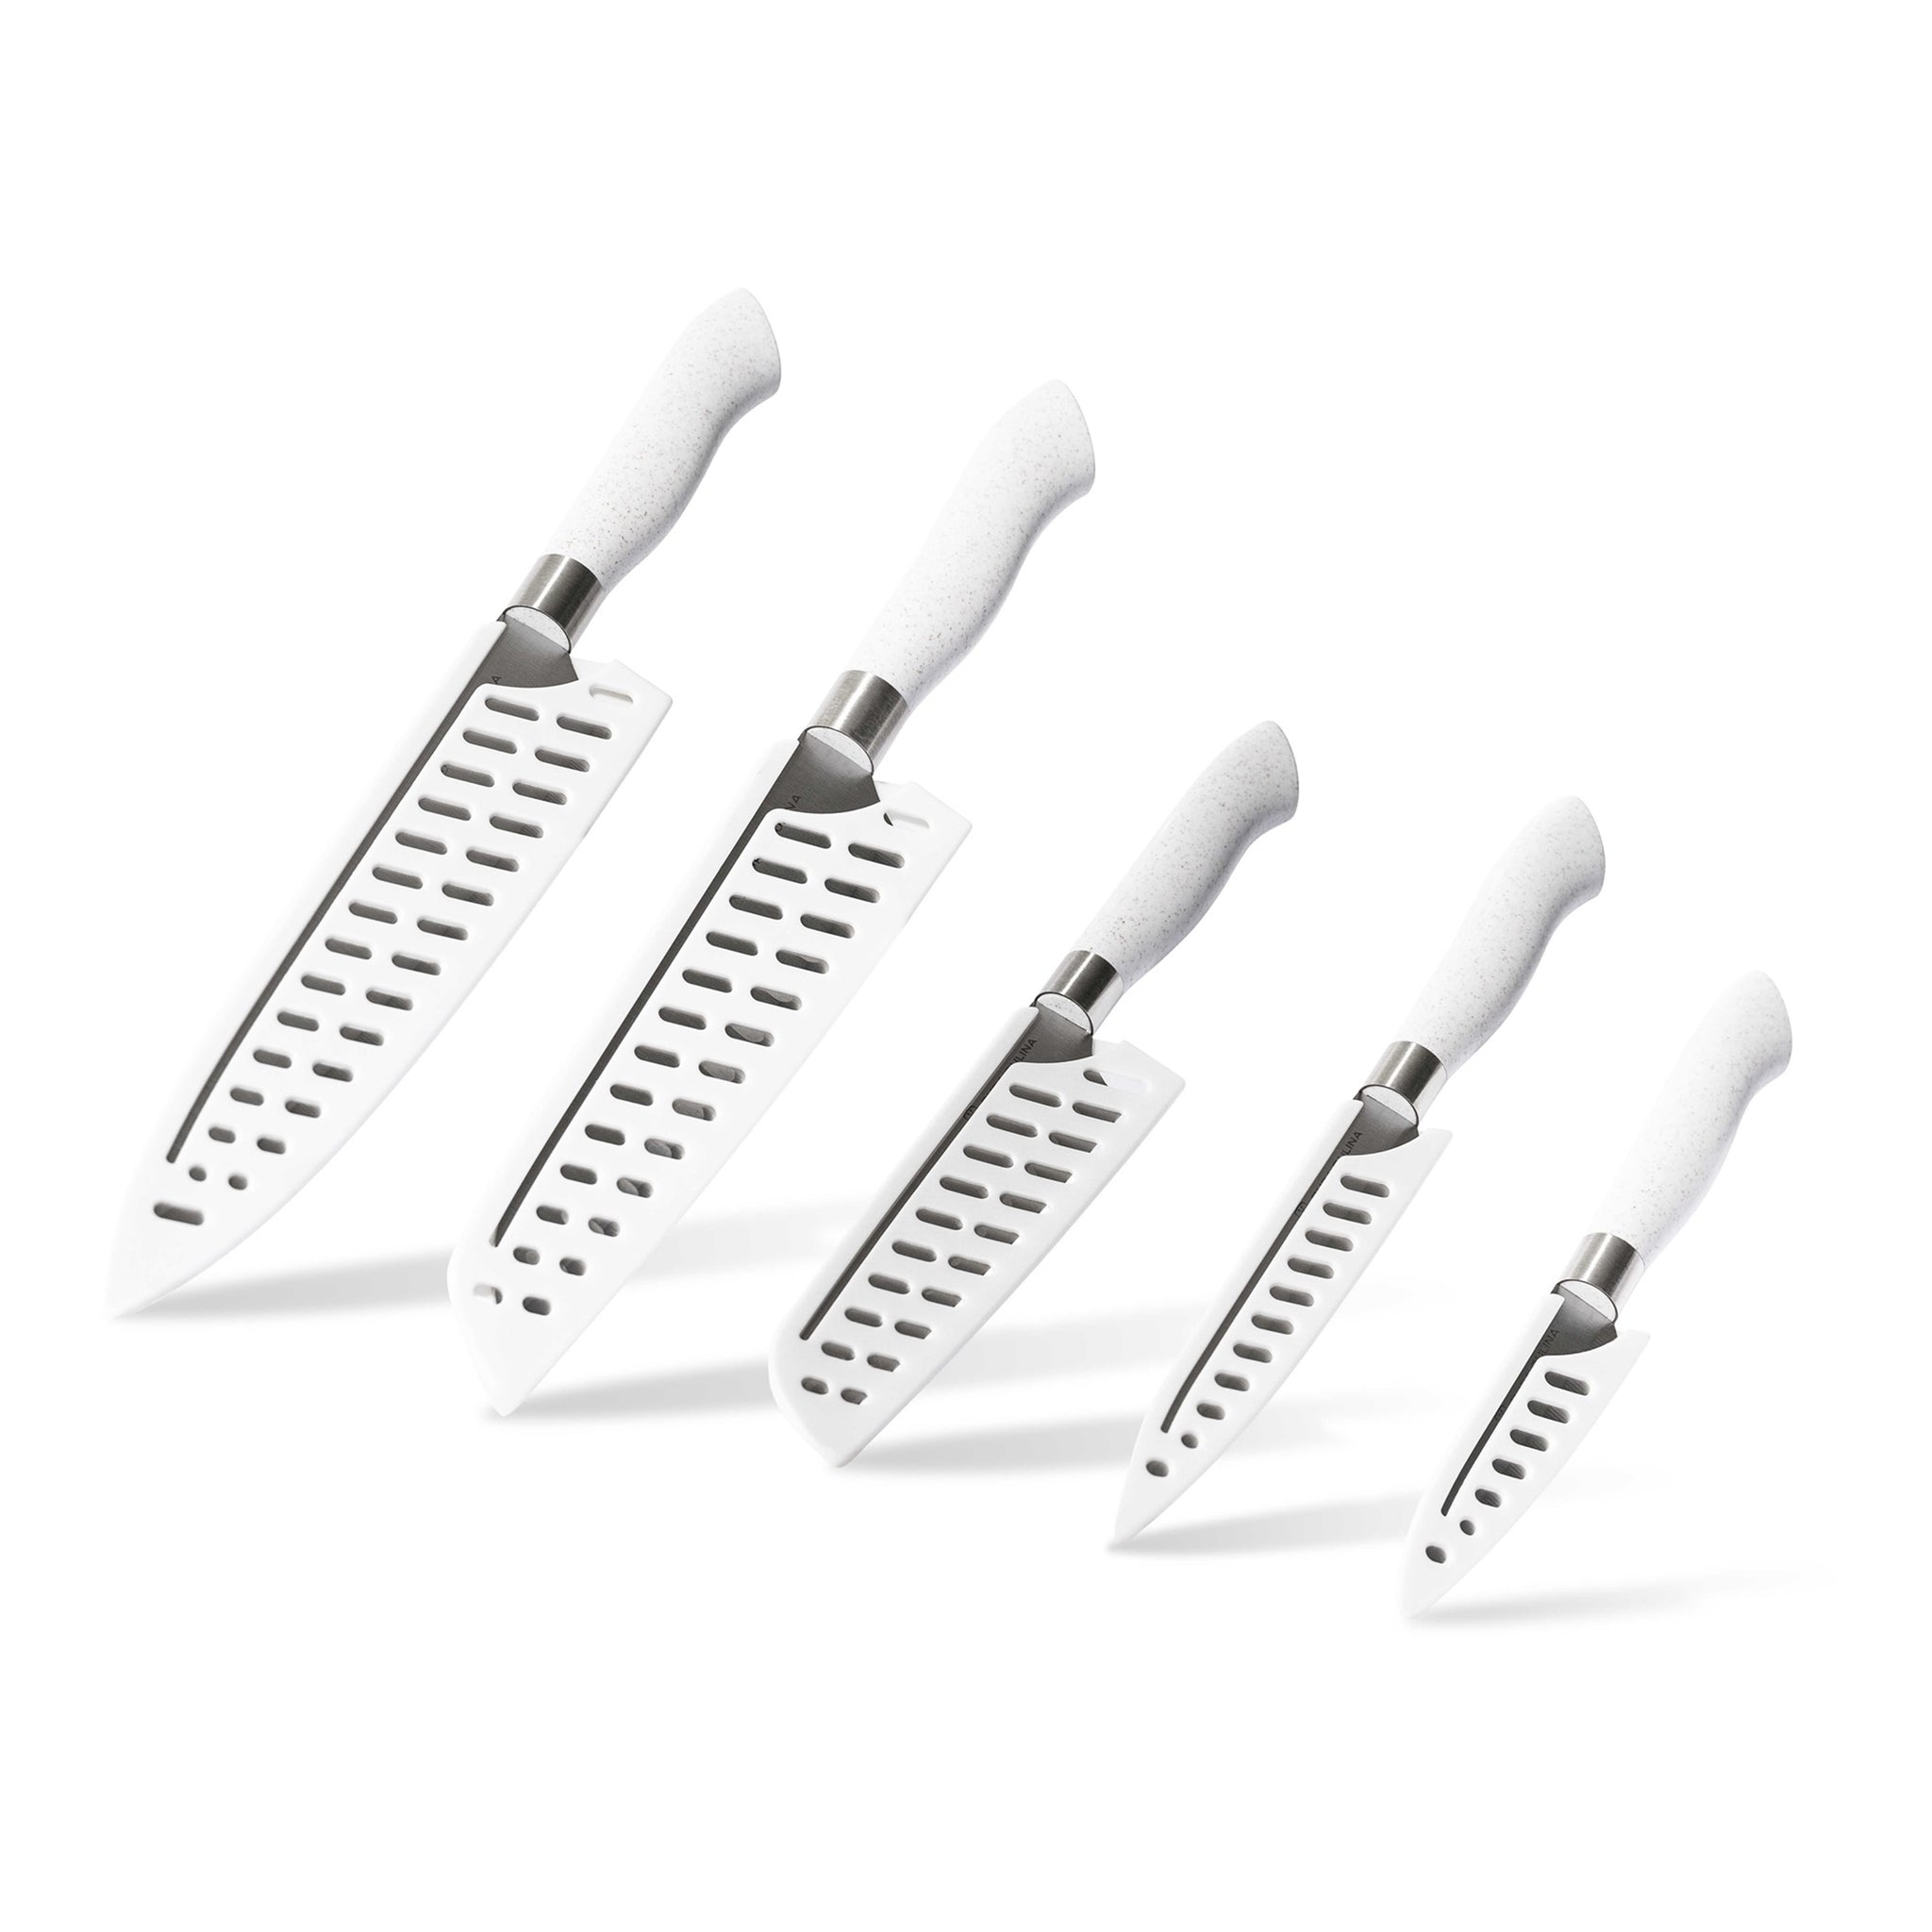 EcoCut 5 Piece Kitchen Knife Set With Blade Guards, Grey